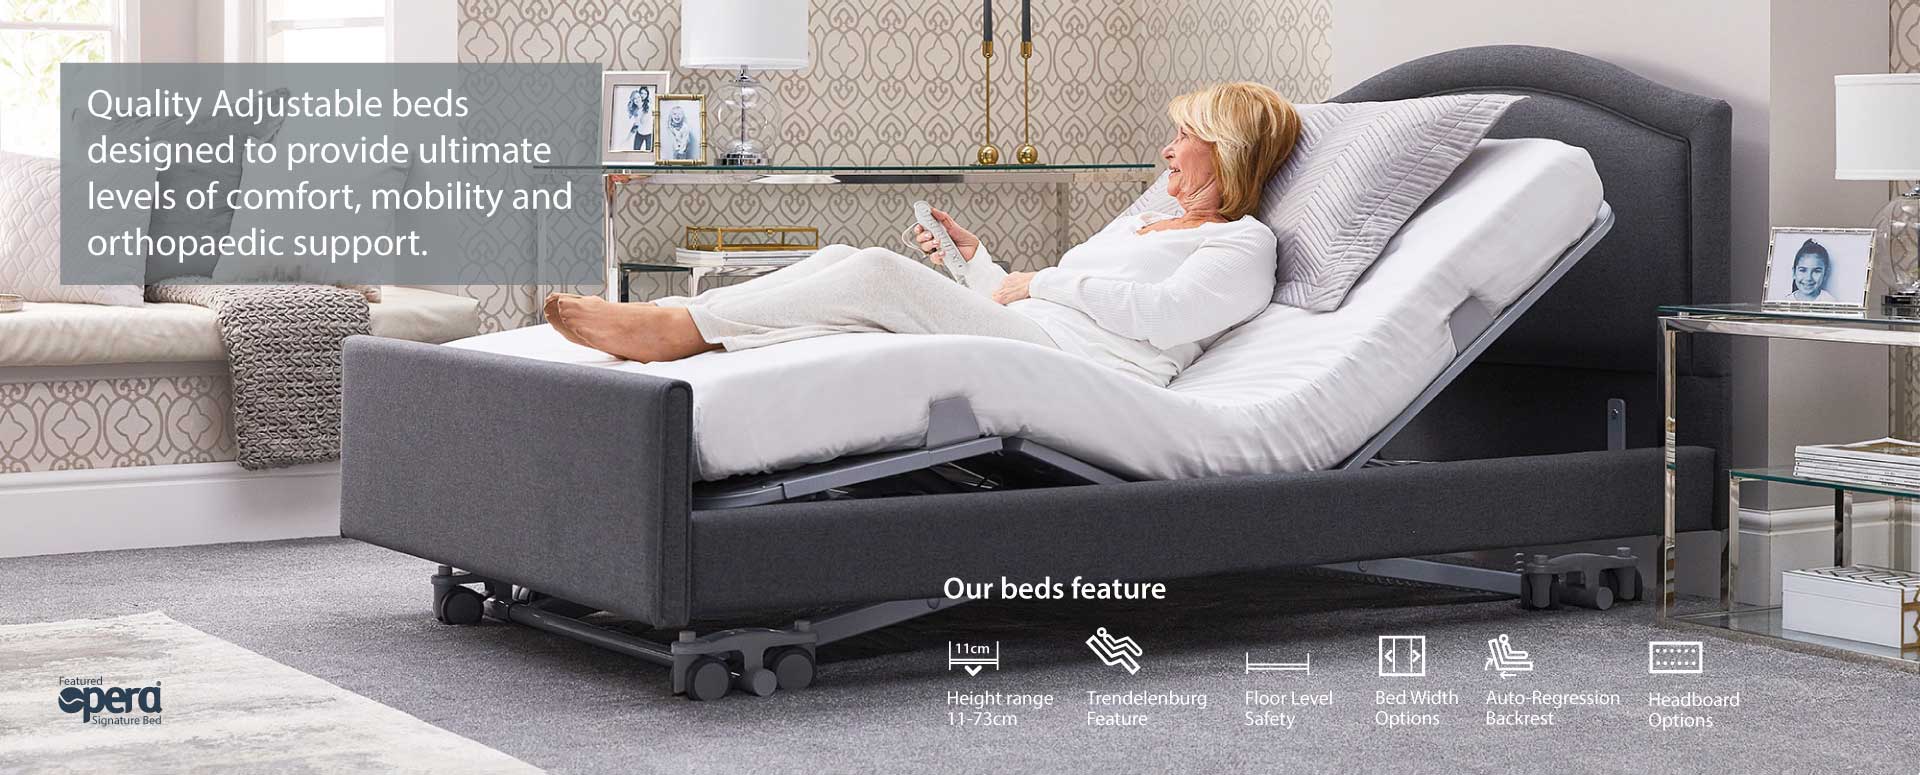 Quality adjustable beds designed to provide ultimate levels of comfort, mobility amd orthopaedic support.